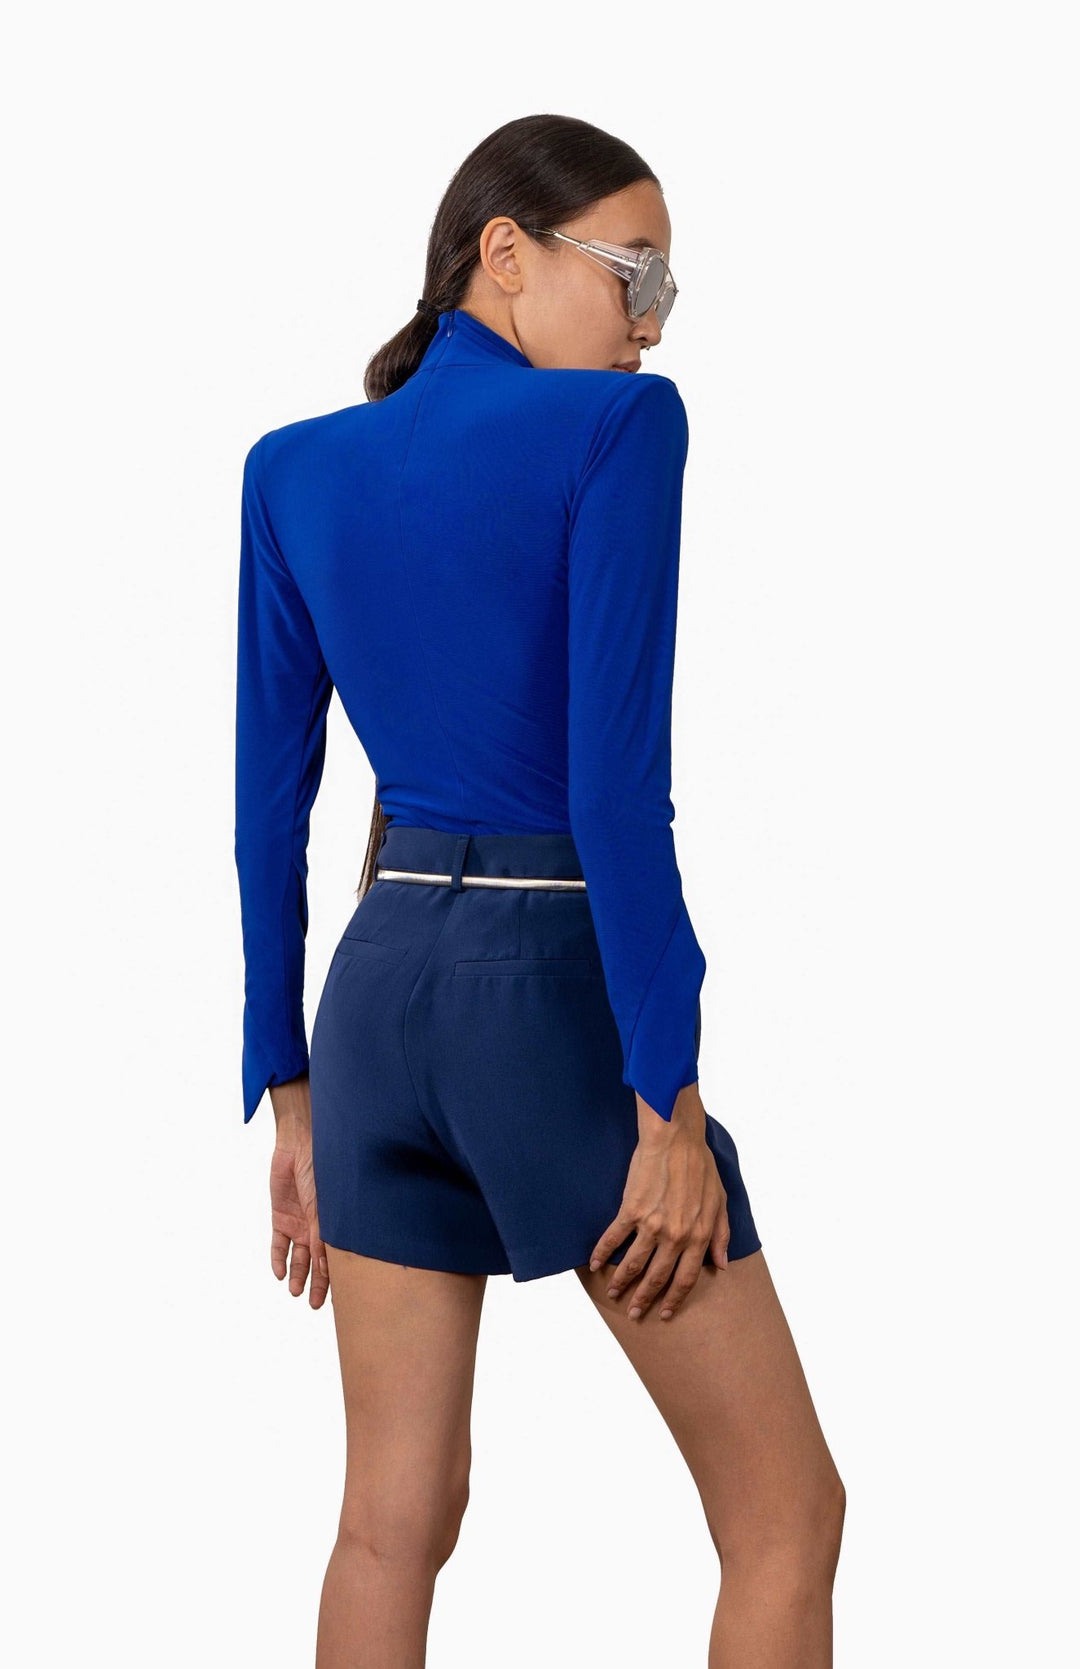 Chic, Royal blue, high shoulder pad bodysuit with a turtleneck and long draped sleeves.